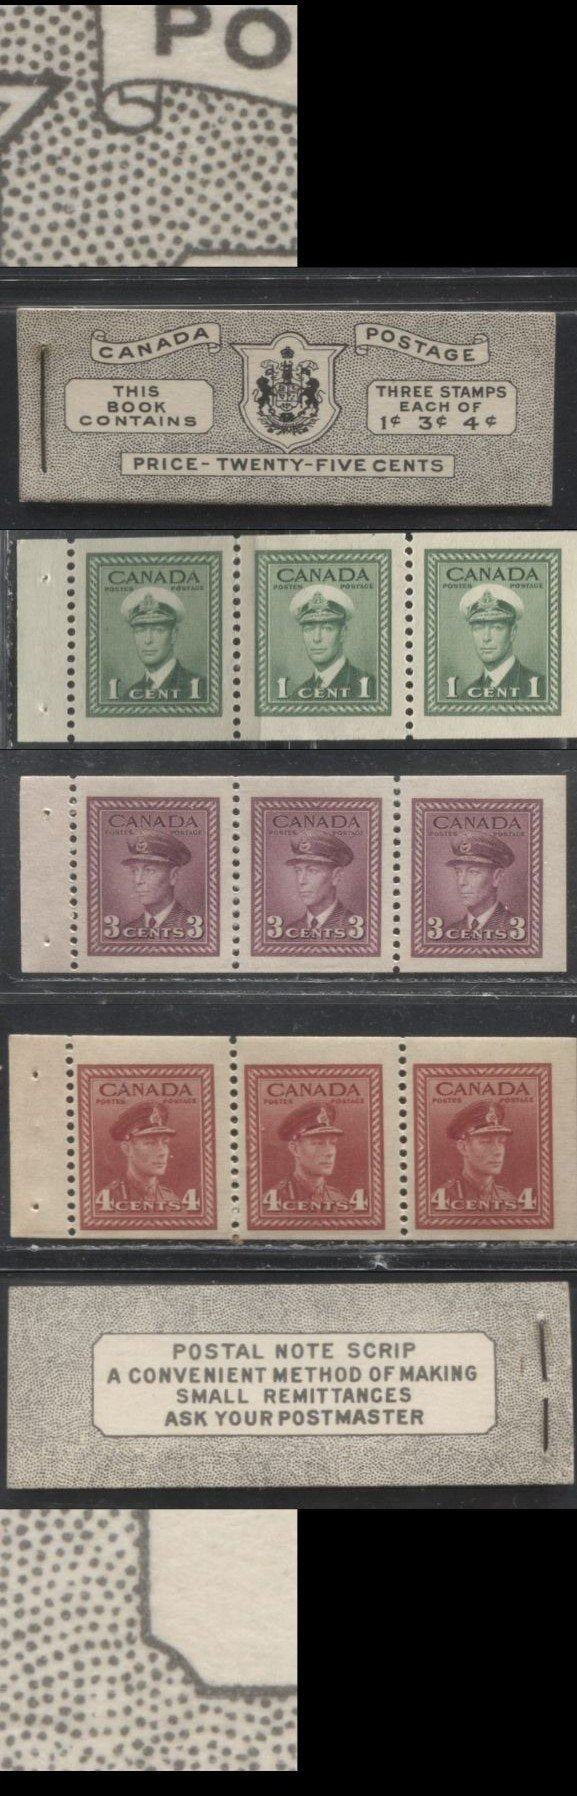 Lot 99 Canada #BK38a 1942-1949 War Issue Complete 25c, English Booklet Containing 1 Pane Each of 3 of 1c Green, 3c Rosy Plum and 4c Carmine Red, Horizontal Ribbed Paper, Harris Front Cover Type IVa , Back Cover Haii, 7c & 6c Rate Page